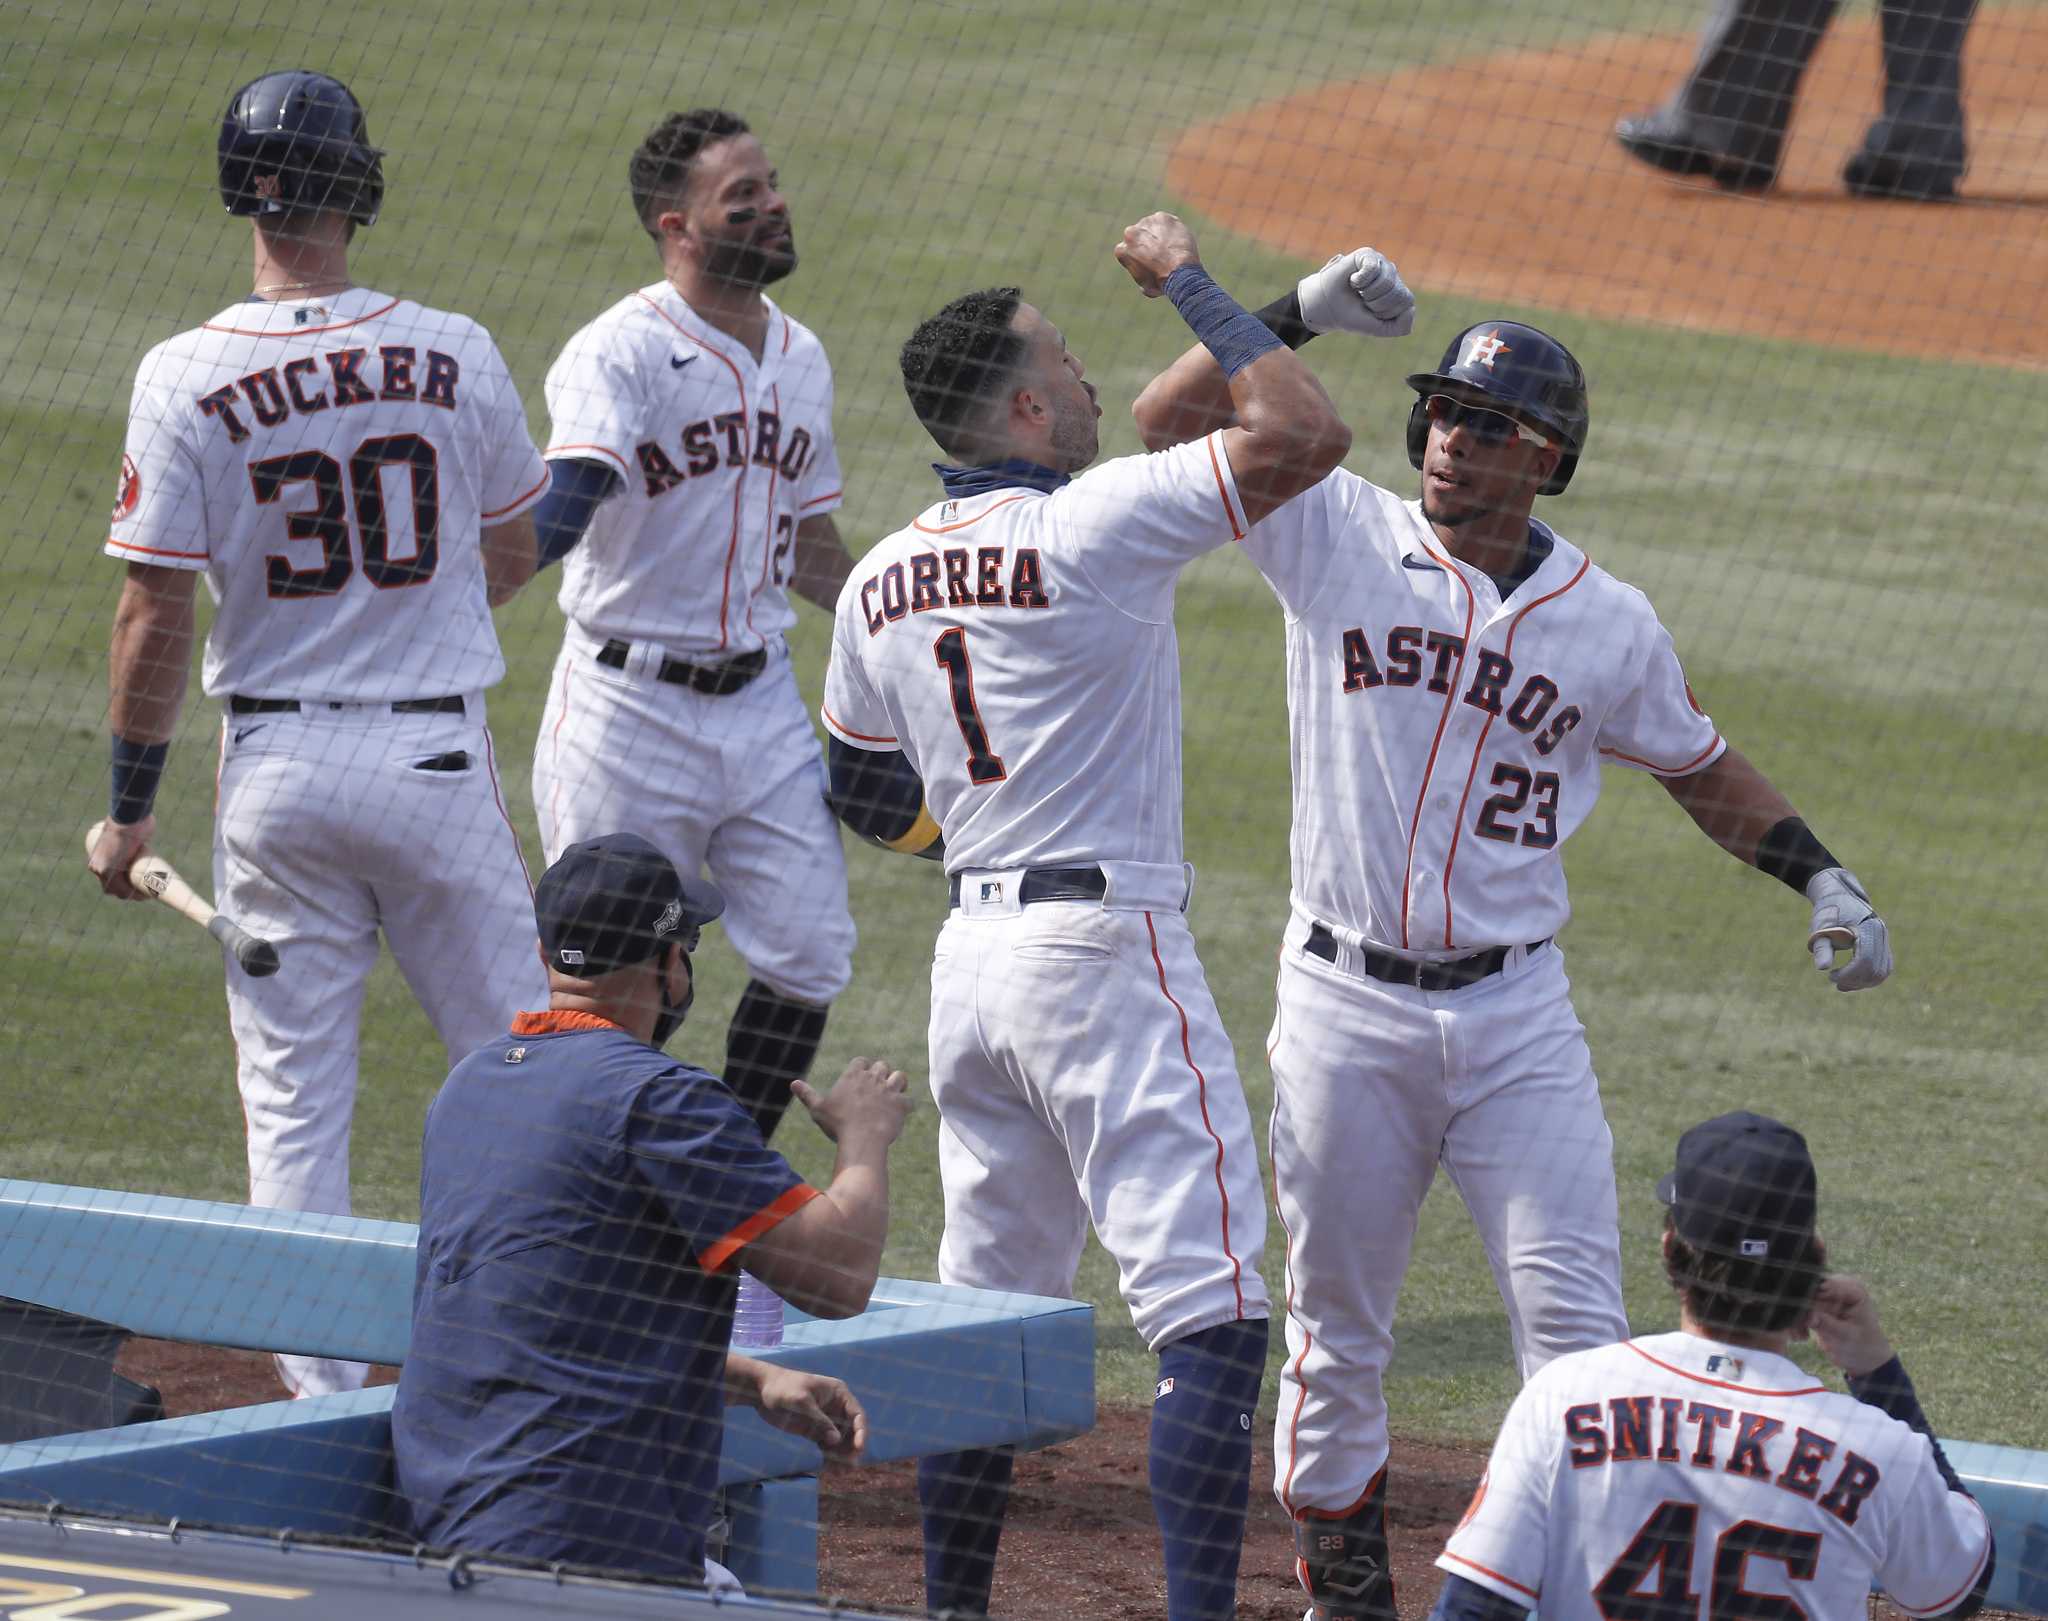 After Marlins' big win, tougher foe looms as Astros visit